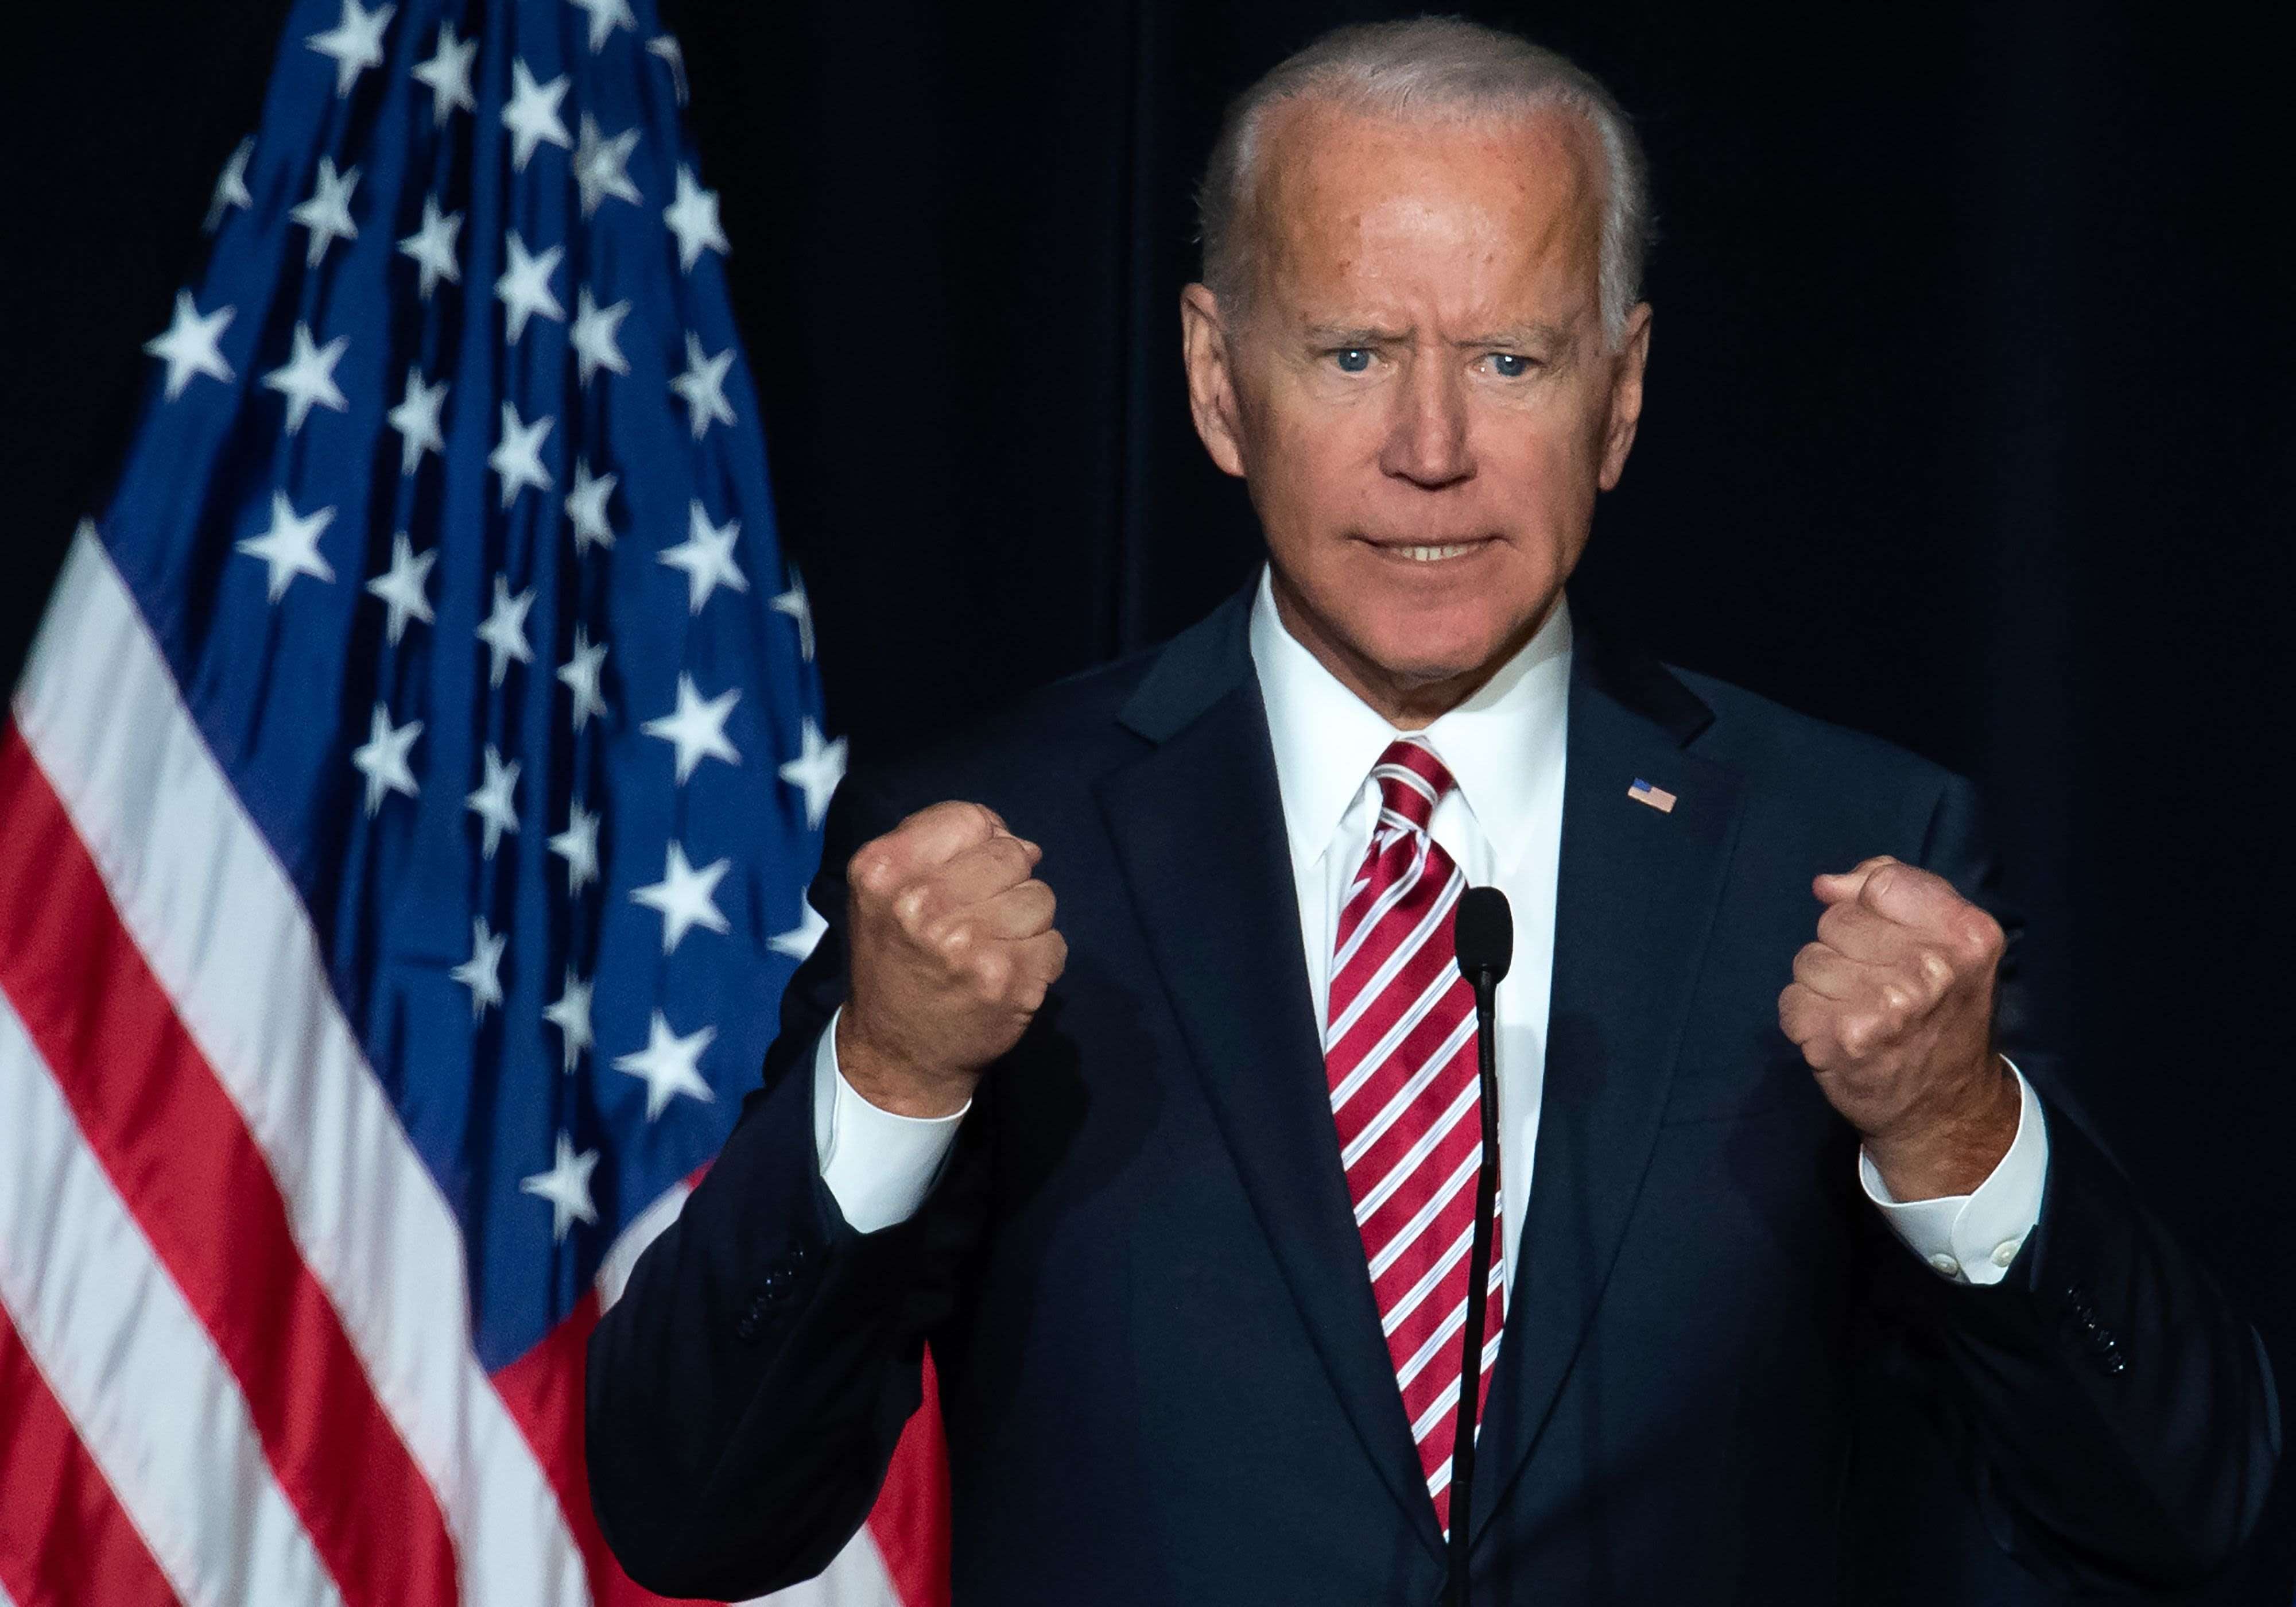 image for A parody website with embarrassing photos of Joe Biden is outranking his official campaign page on Google